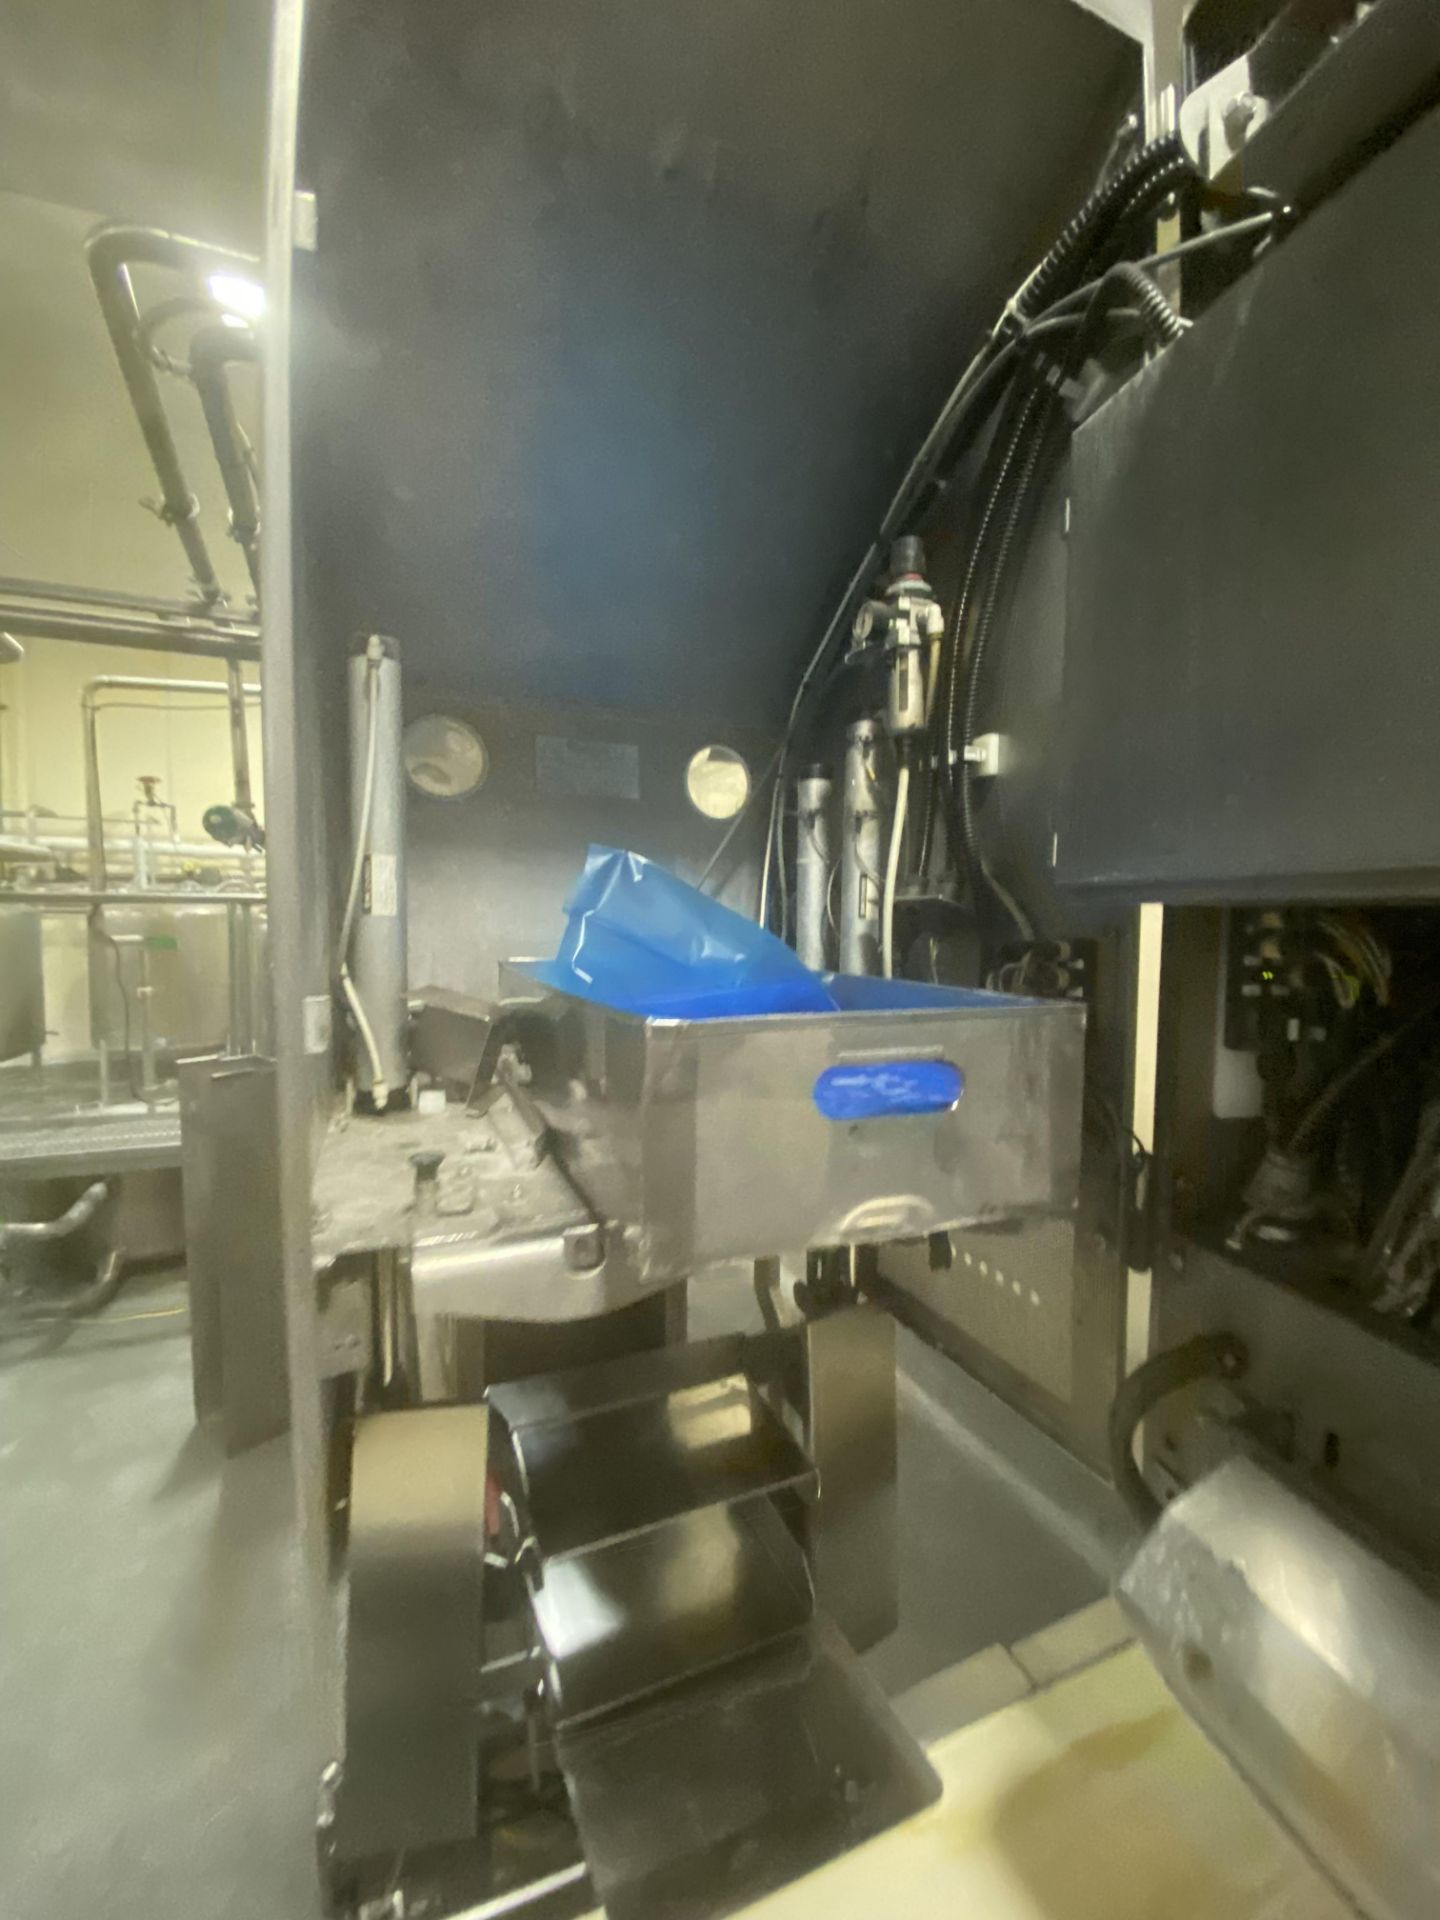 Stoelting (Relco)S/S Cheese Blocker with Cyrovac CL20 Bagger, M/N C120, S/N 01102, with - Bild 4 aus 11